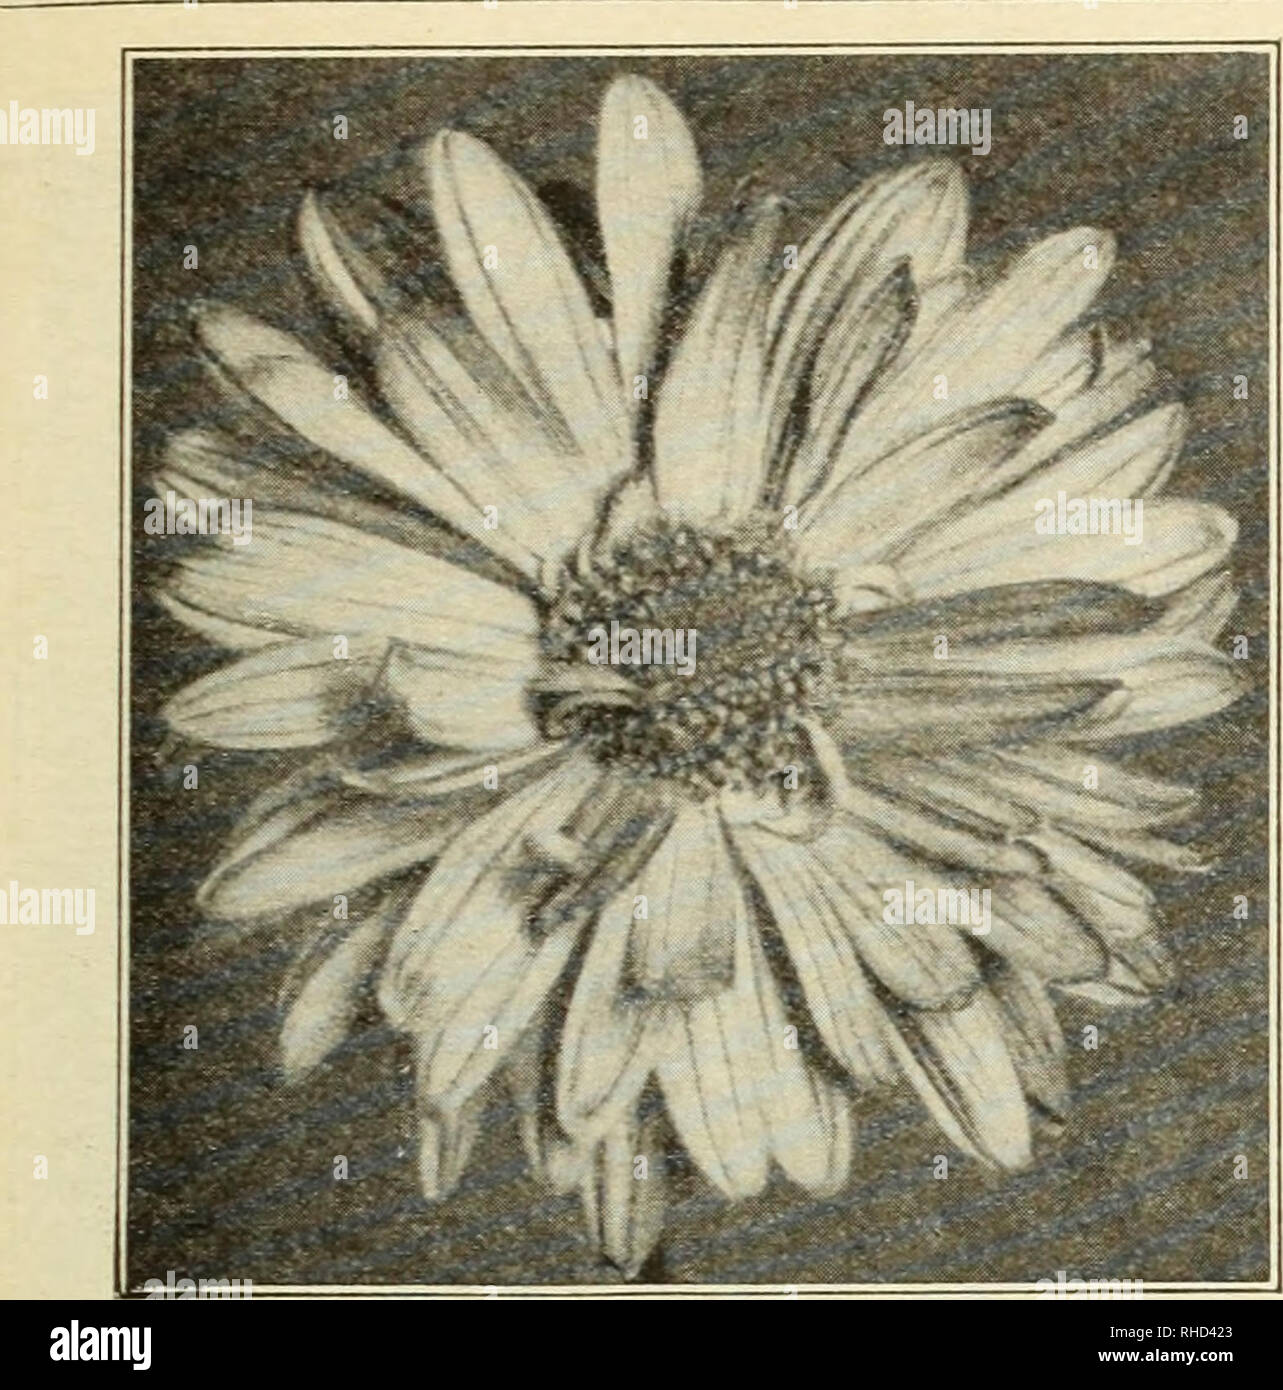 . Bolgiano's capitol city seeds : 1931. Nurseries (Horticulture) Catalogs; Bulbs (Plants) Catalogs; Vegetables Catalogs; Garden tools Catalogs; Seeds Catalogs; Flowers Catalogs; Poultry Equipment and supplies Catalogs. Bolgiano's &quot;Capitol City&quot; Flower Seeds 45. Annual Chrysanthemum CANDYTUFT (PERENNIAL) 818. May and June. Six inches. Evergreen plants covered with pink blooms in spring and parly summer. Excellent for rockeries or borders. Pkt. 10 cts.; V4 oz. 25 cts. CANTERBURY BELLS B. 819. CAMPANULA MEDIUM MIXED. 2 ft. Beautiful bell-like flow- ers of pink, blue and white. Blooms fr Stock Photo